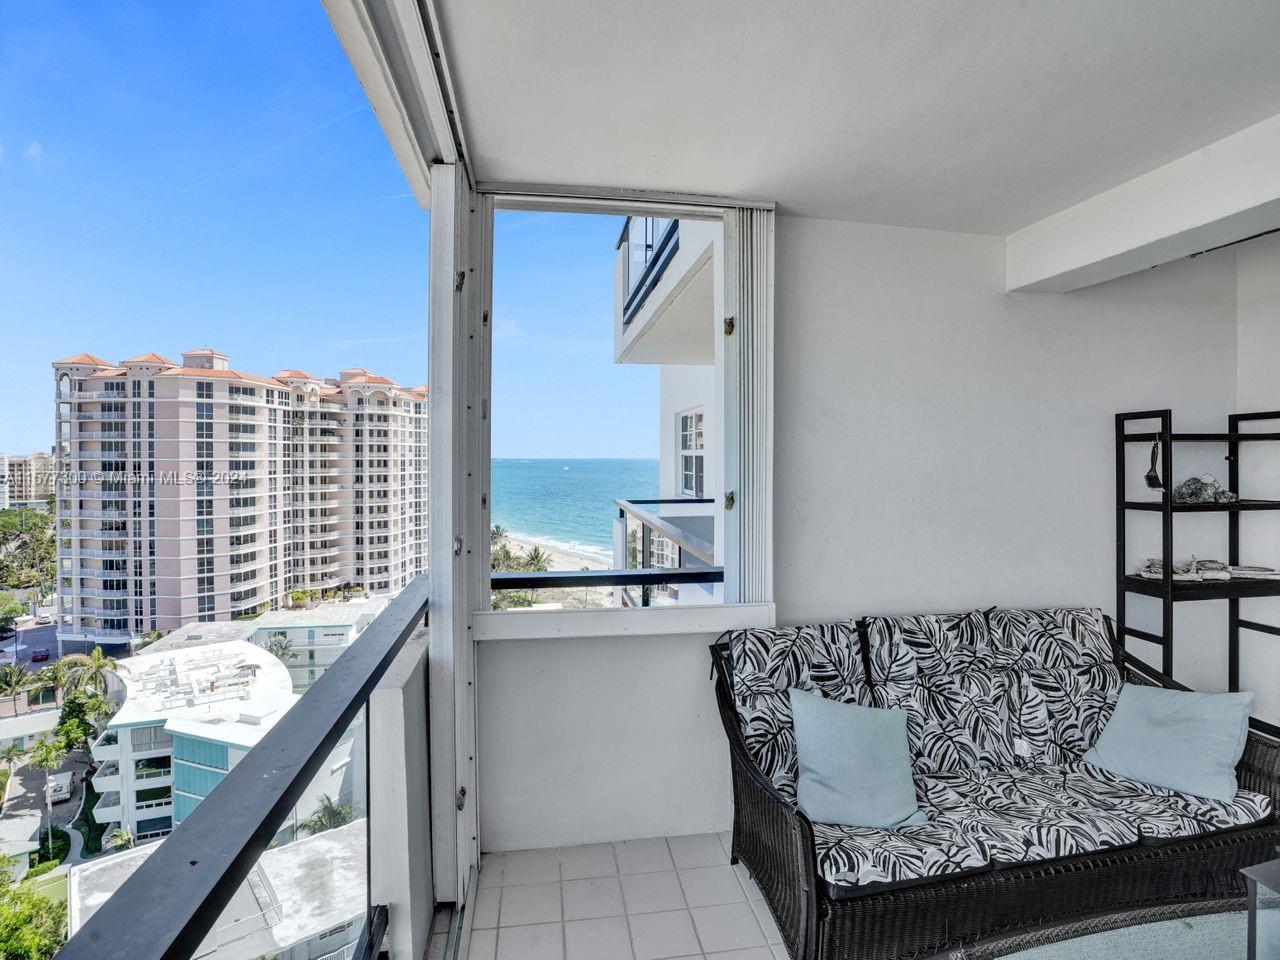 1500 S Ocean Blvd Unit 1408, Lauderdale By The Sea, Florida, 33062, United States, 2 Bedrooms Bedrooms, ,2 BathroomsBathrooms,Residential,For Sale,1500 S Ocean Blvd Unit 1408,1514714